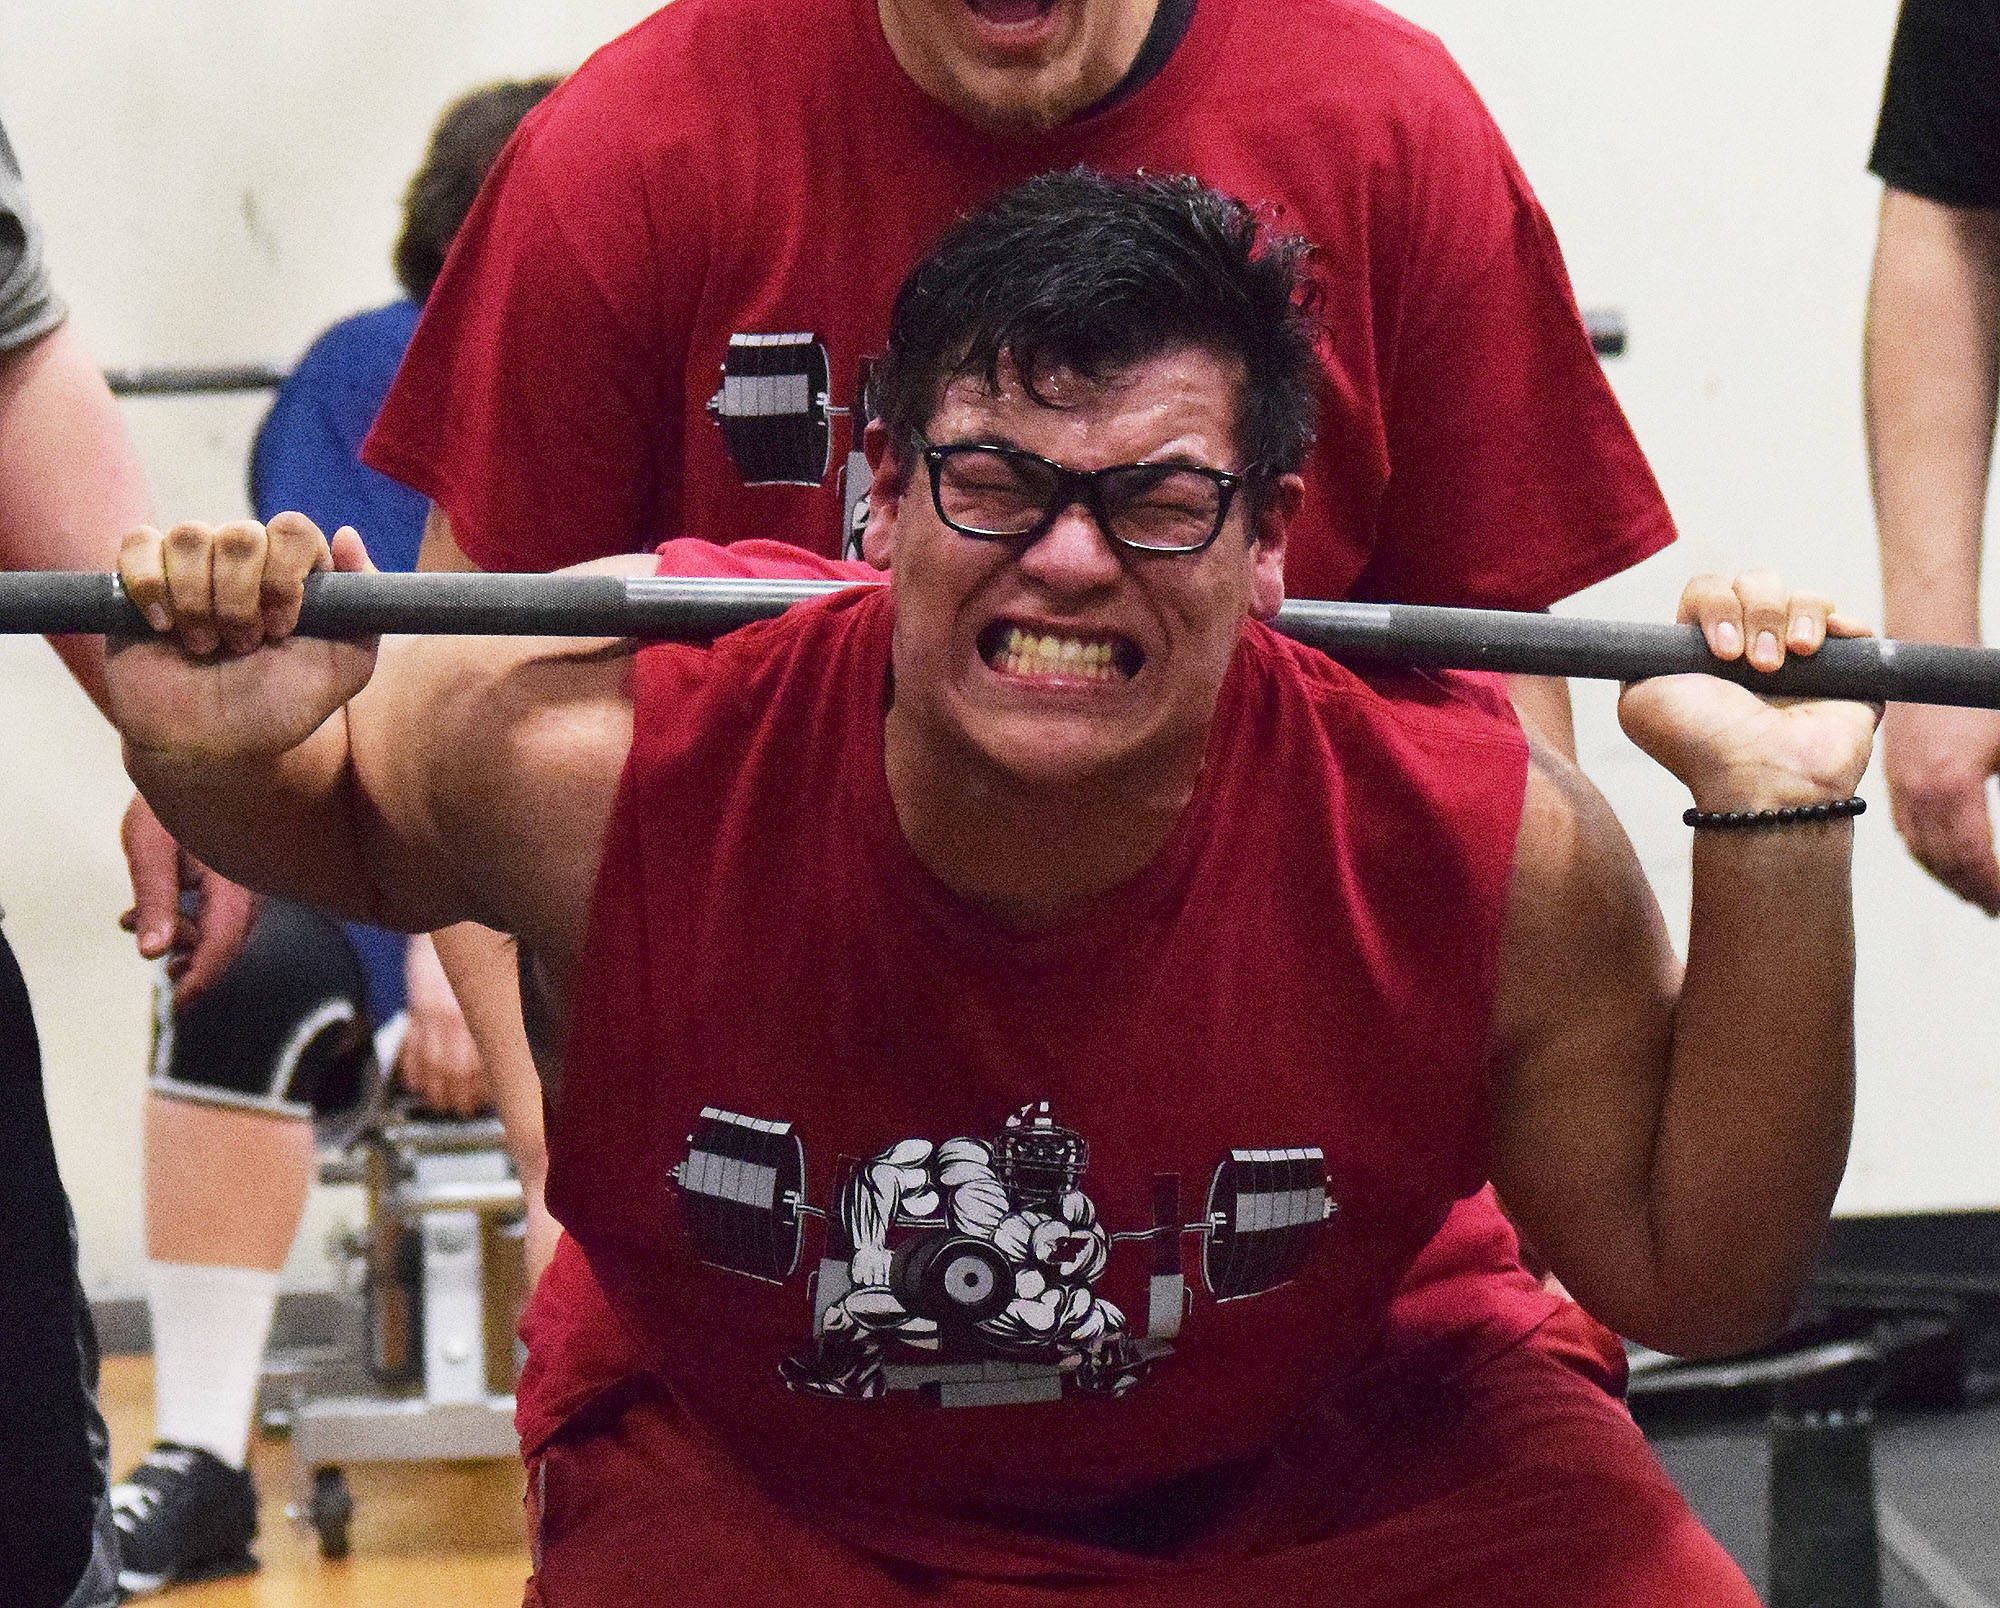 Kenai Central senior Jonathan Delgado attempts to break the 11th-12th grade boys squat record Wednesday evening at the 11th biannual CrossFit Competition at Soldotna High School. (Photo by Joey Klecka/Peninsula Clarion)